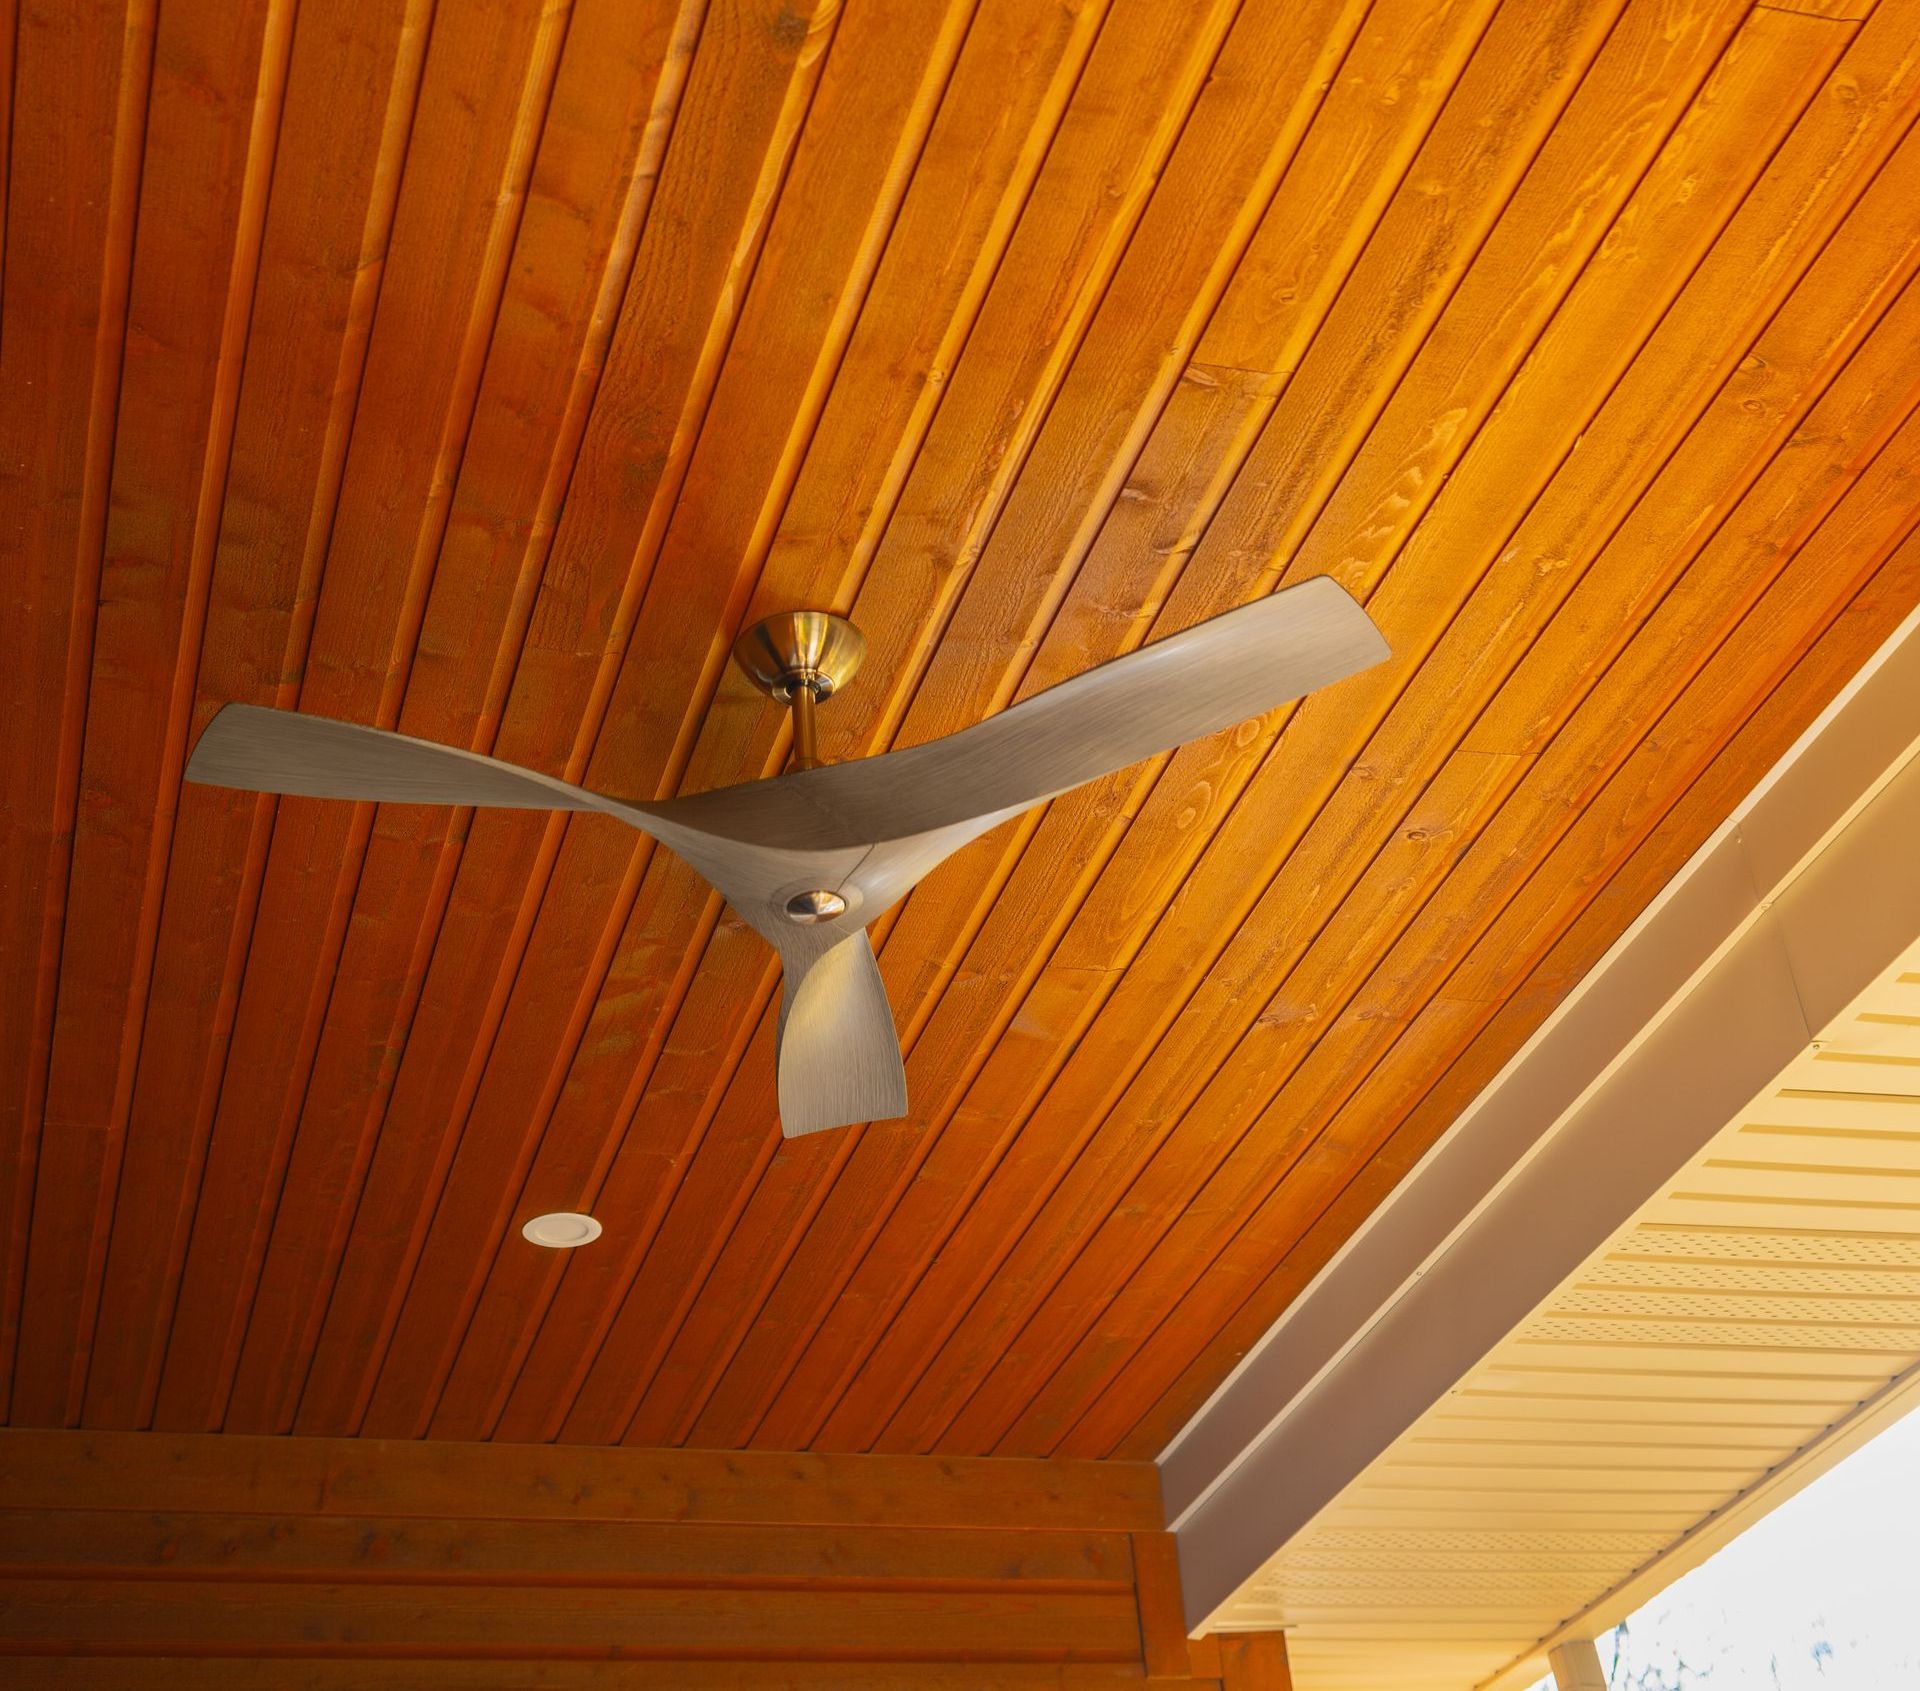 A ceiling fan is hanging from a wooden ceiling